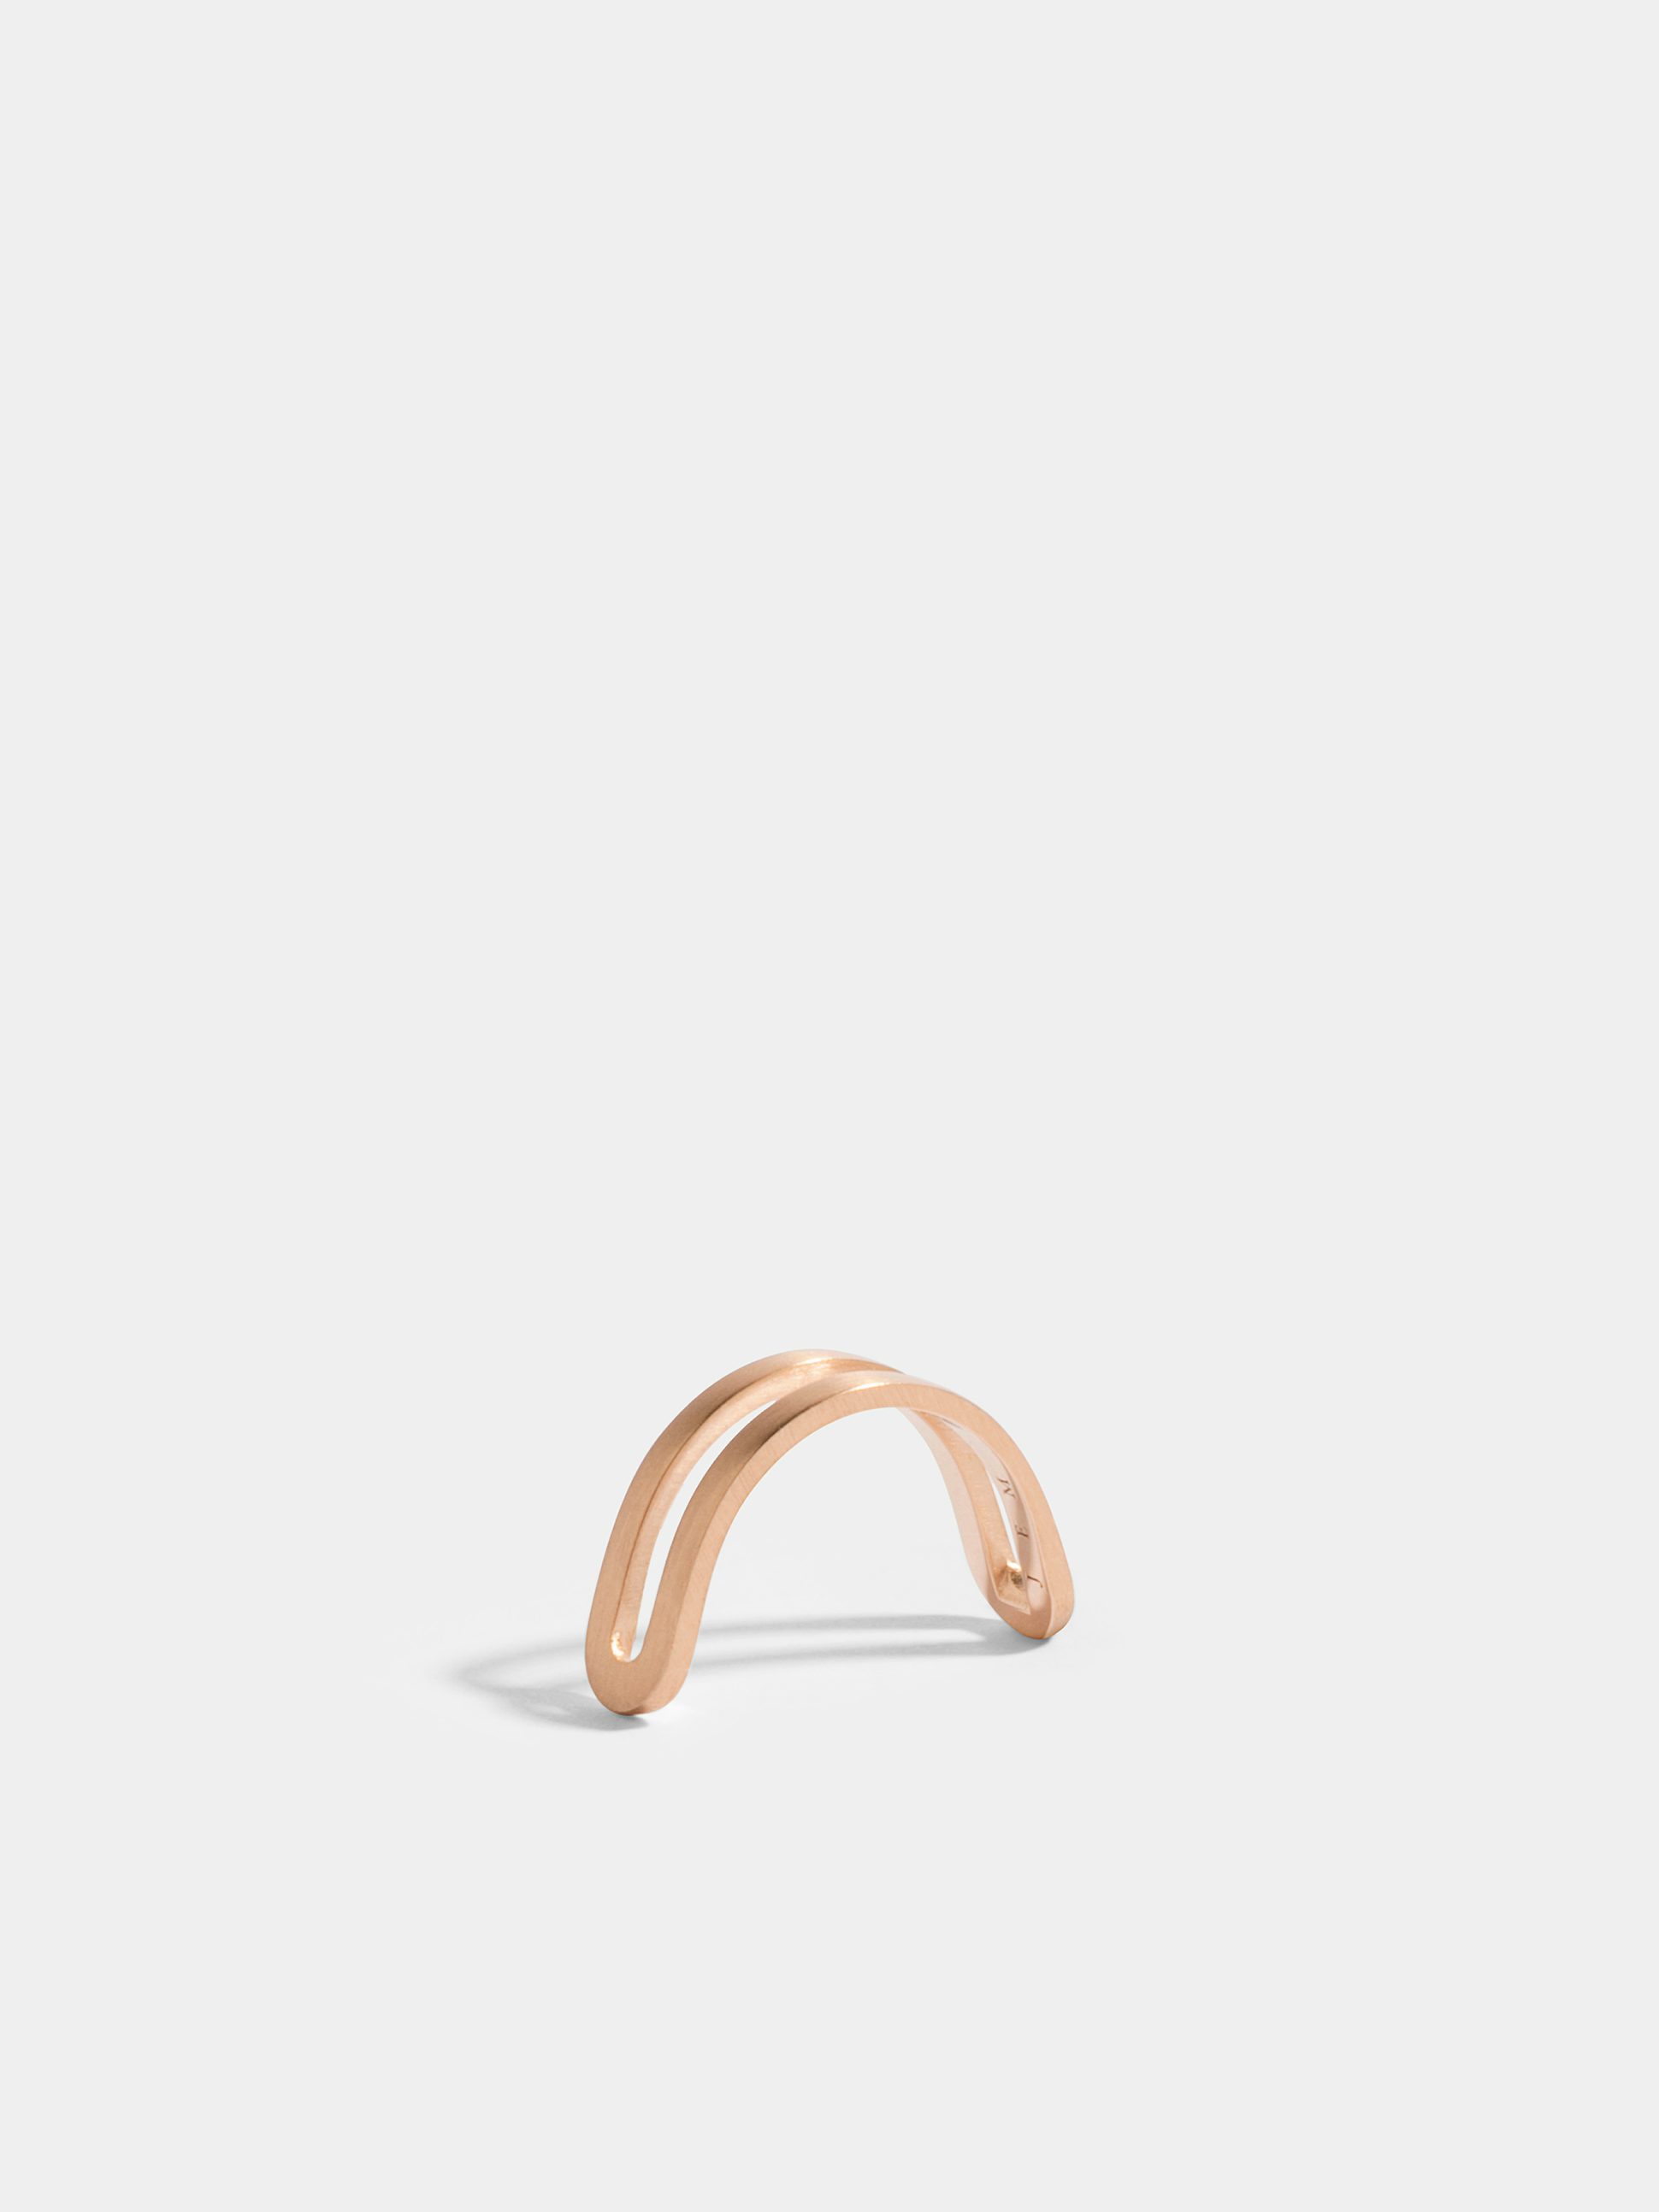 Étreintes simple half-ring in 18k Fairmined ethical rose gold, with brushed finish.